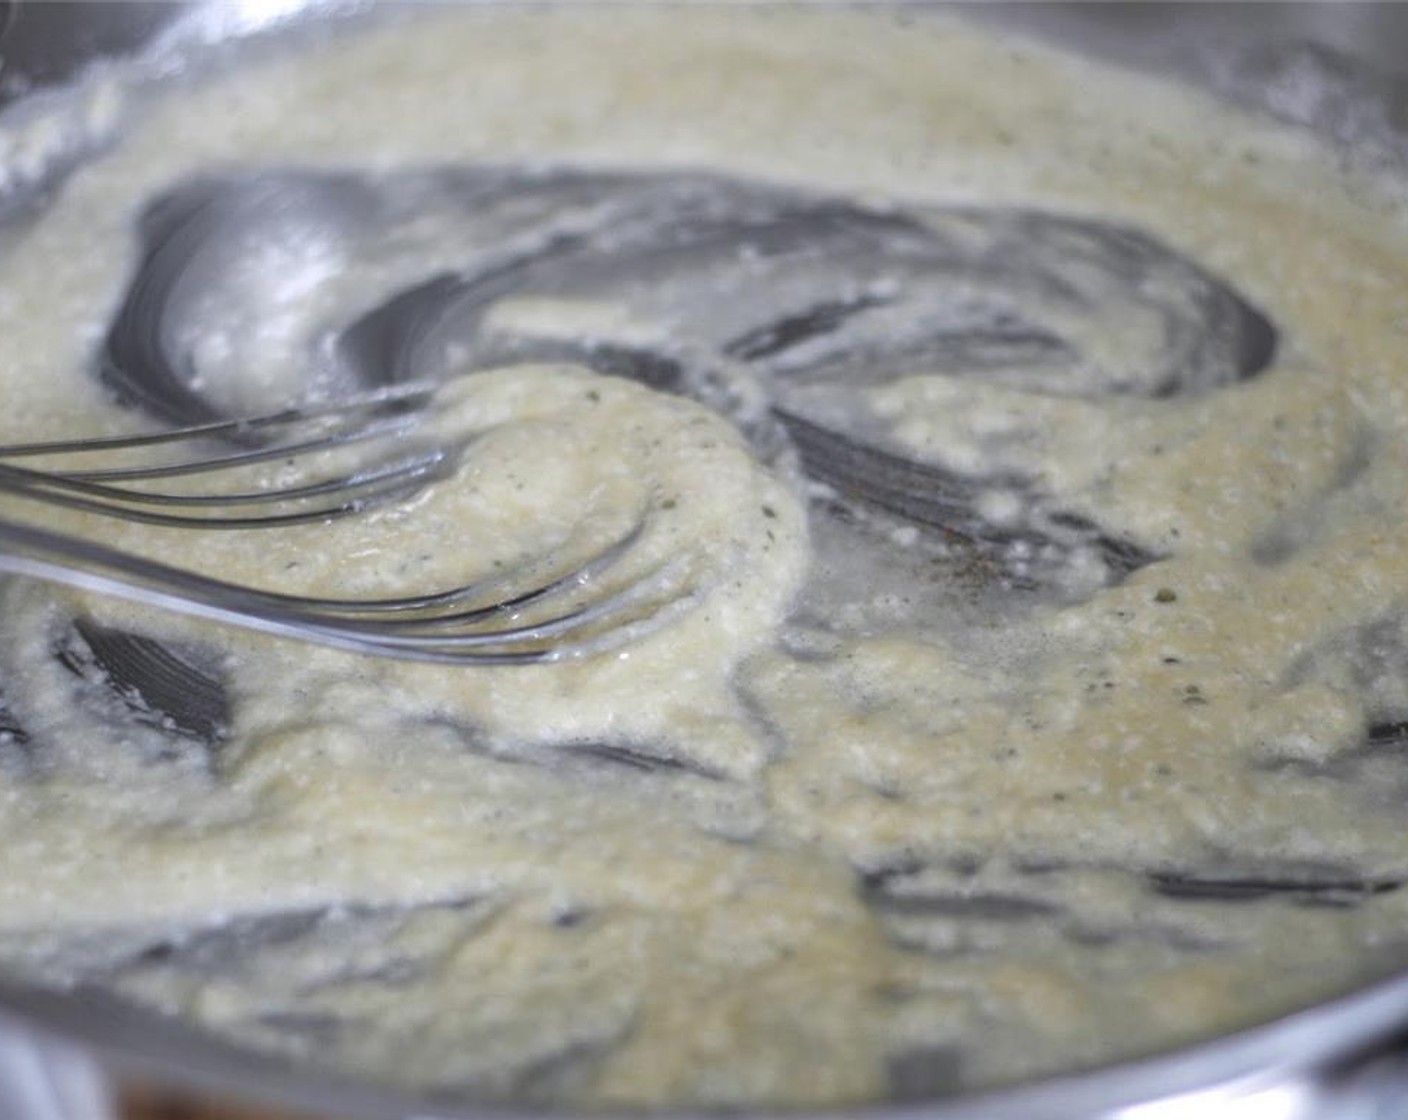 step 3 In a saute pan, melt half of Unsalted Butter (2 Tbsp). Add All-Purpose Flour (2 Tbsp) and whisk to combine. Let cook, stirring, for 2 minutes.